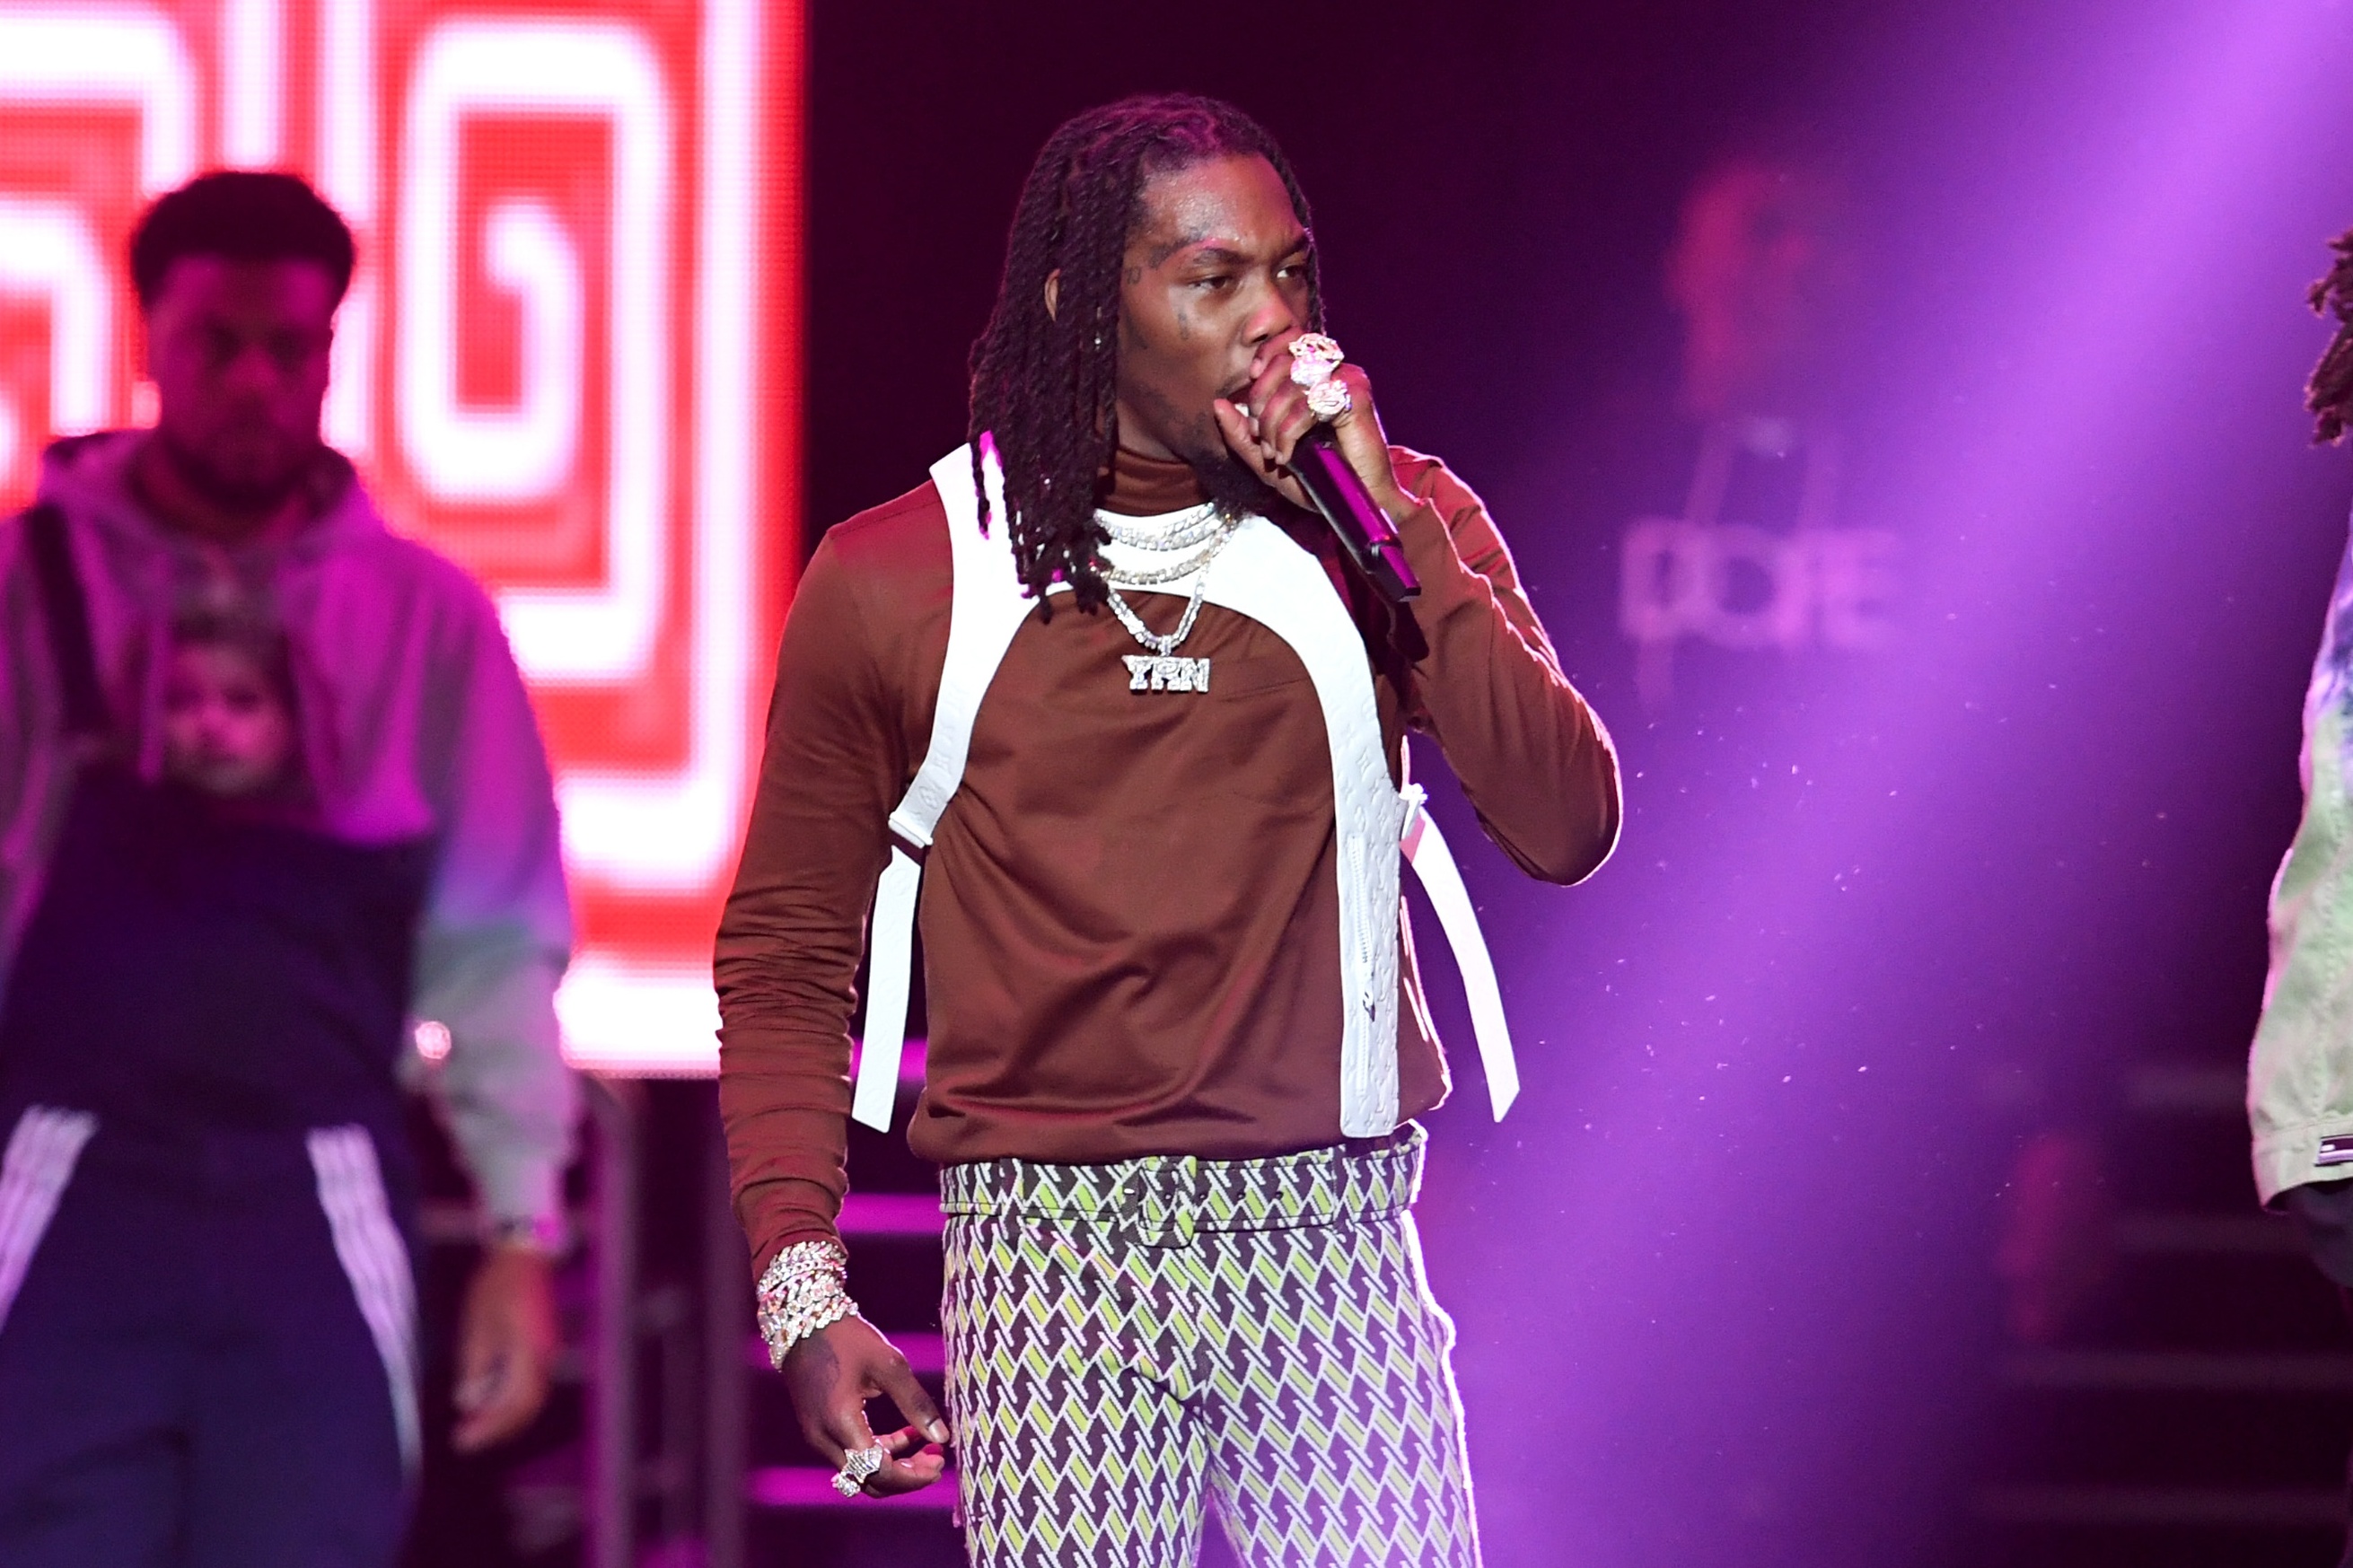 Offset Facing Felony Charge for Allegedly Smacking Phone Out of Fan's Hand